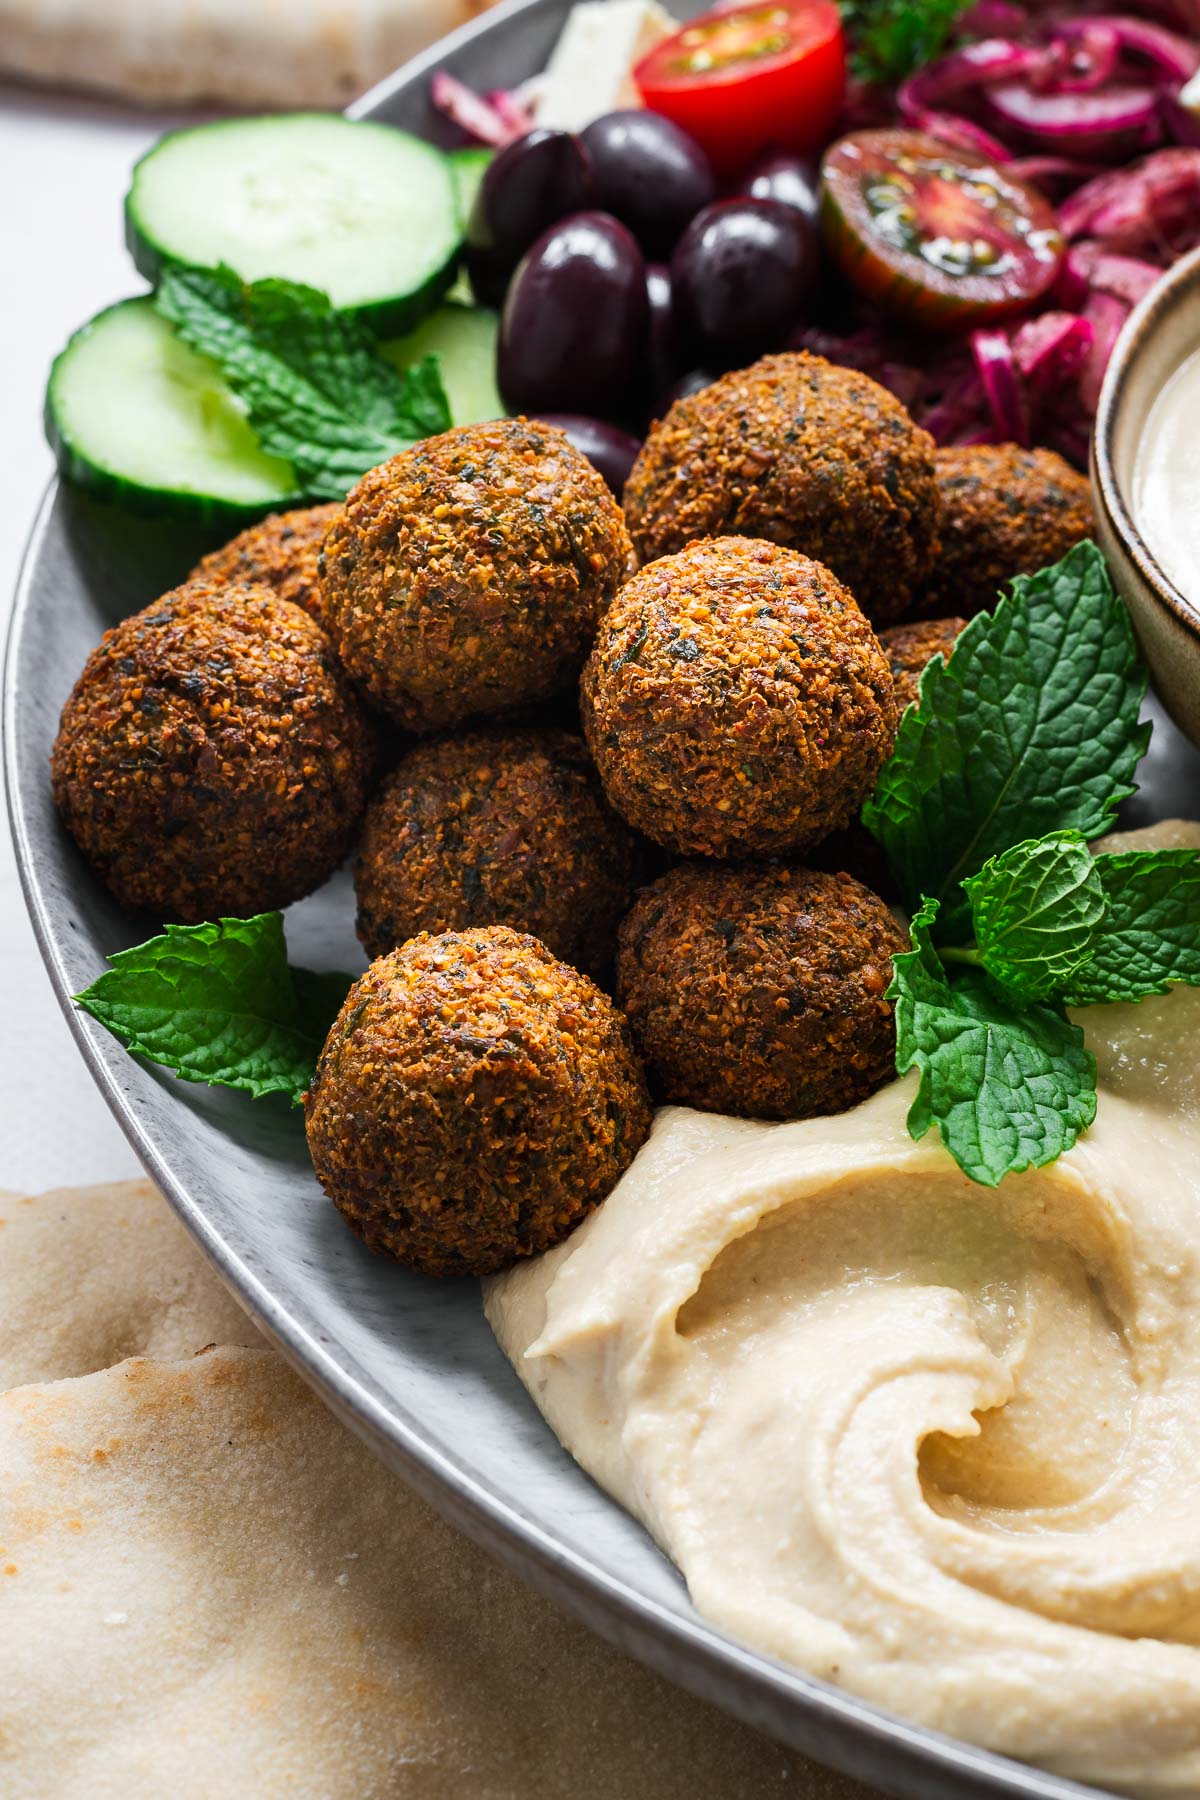 Crispy Middle Eastern falafel balls with hummus, tahini sauce and fresh salad in a large bowl.